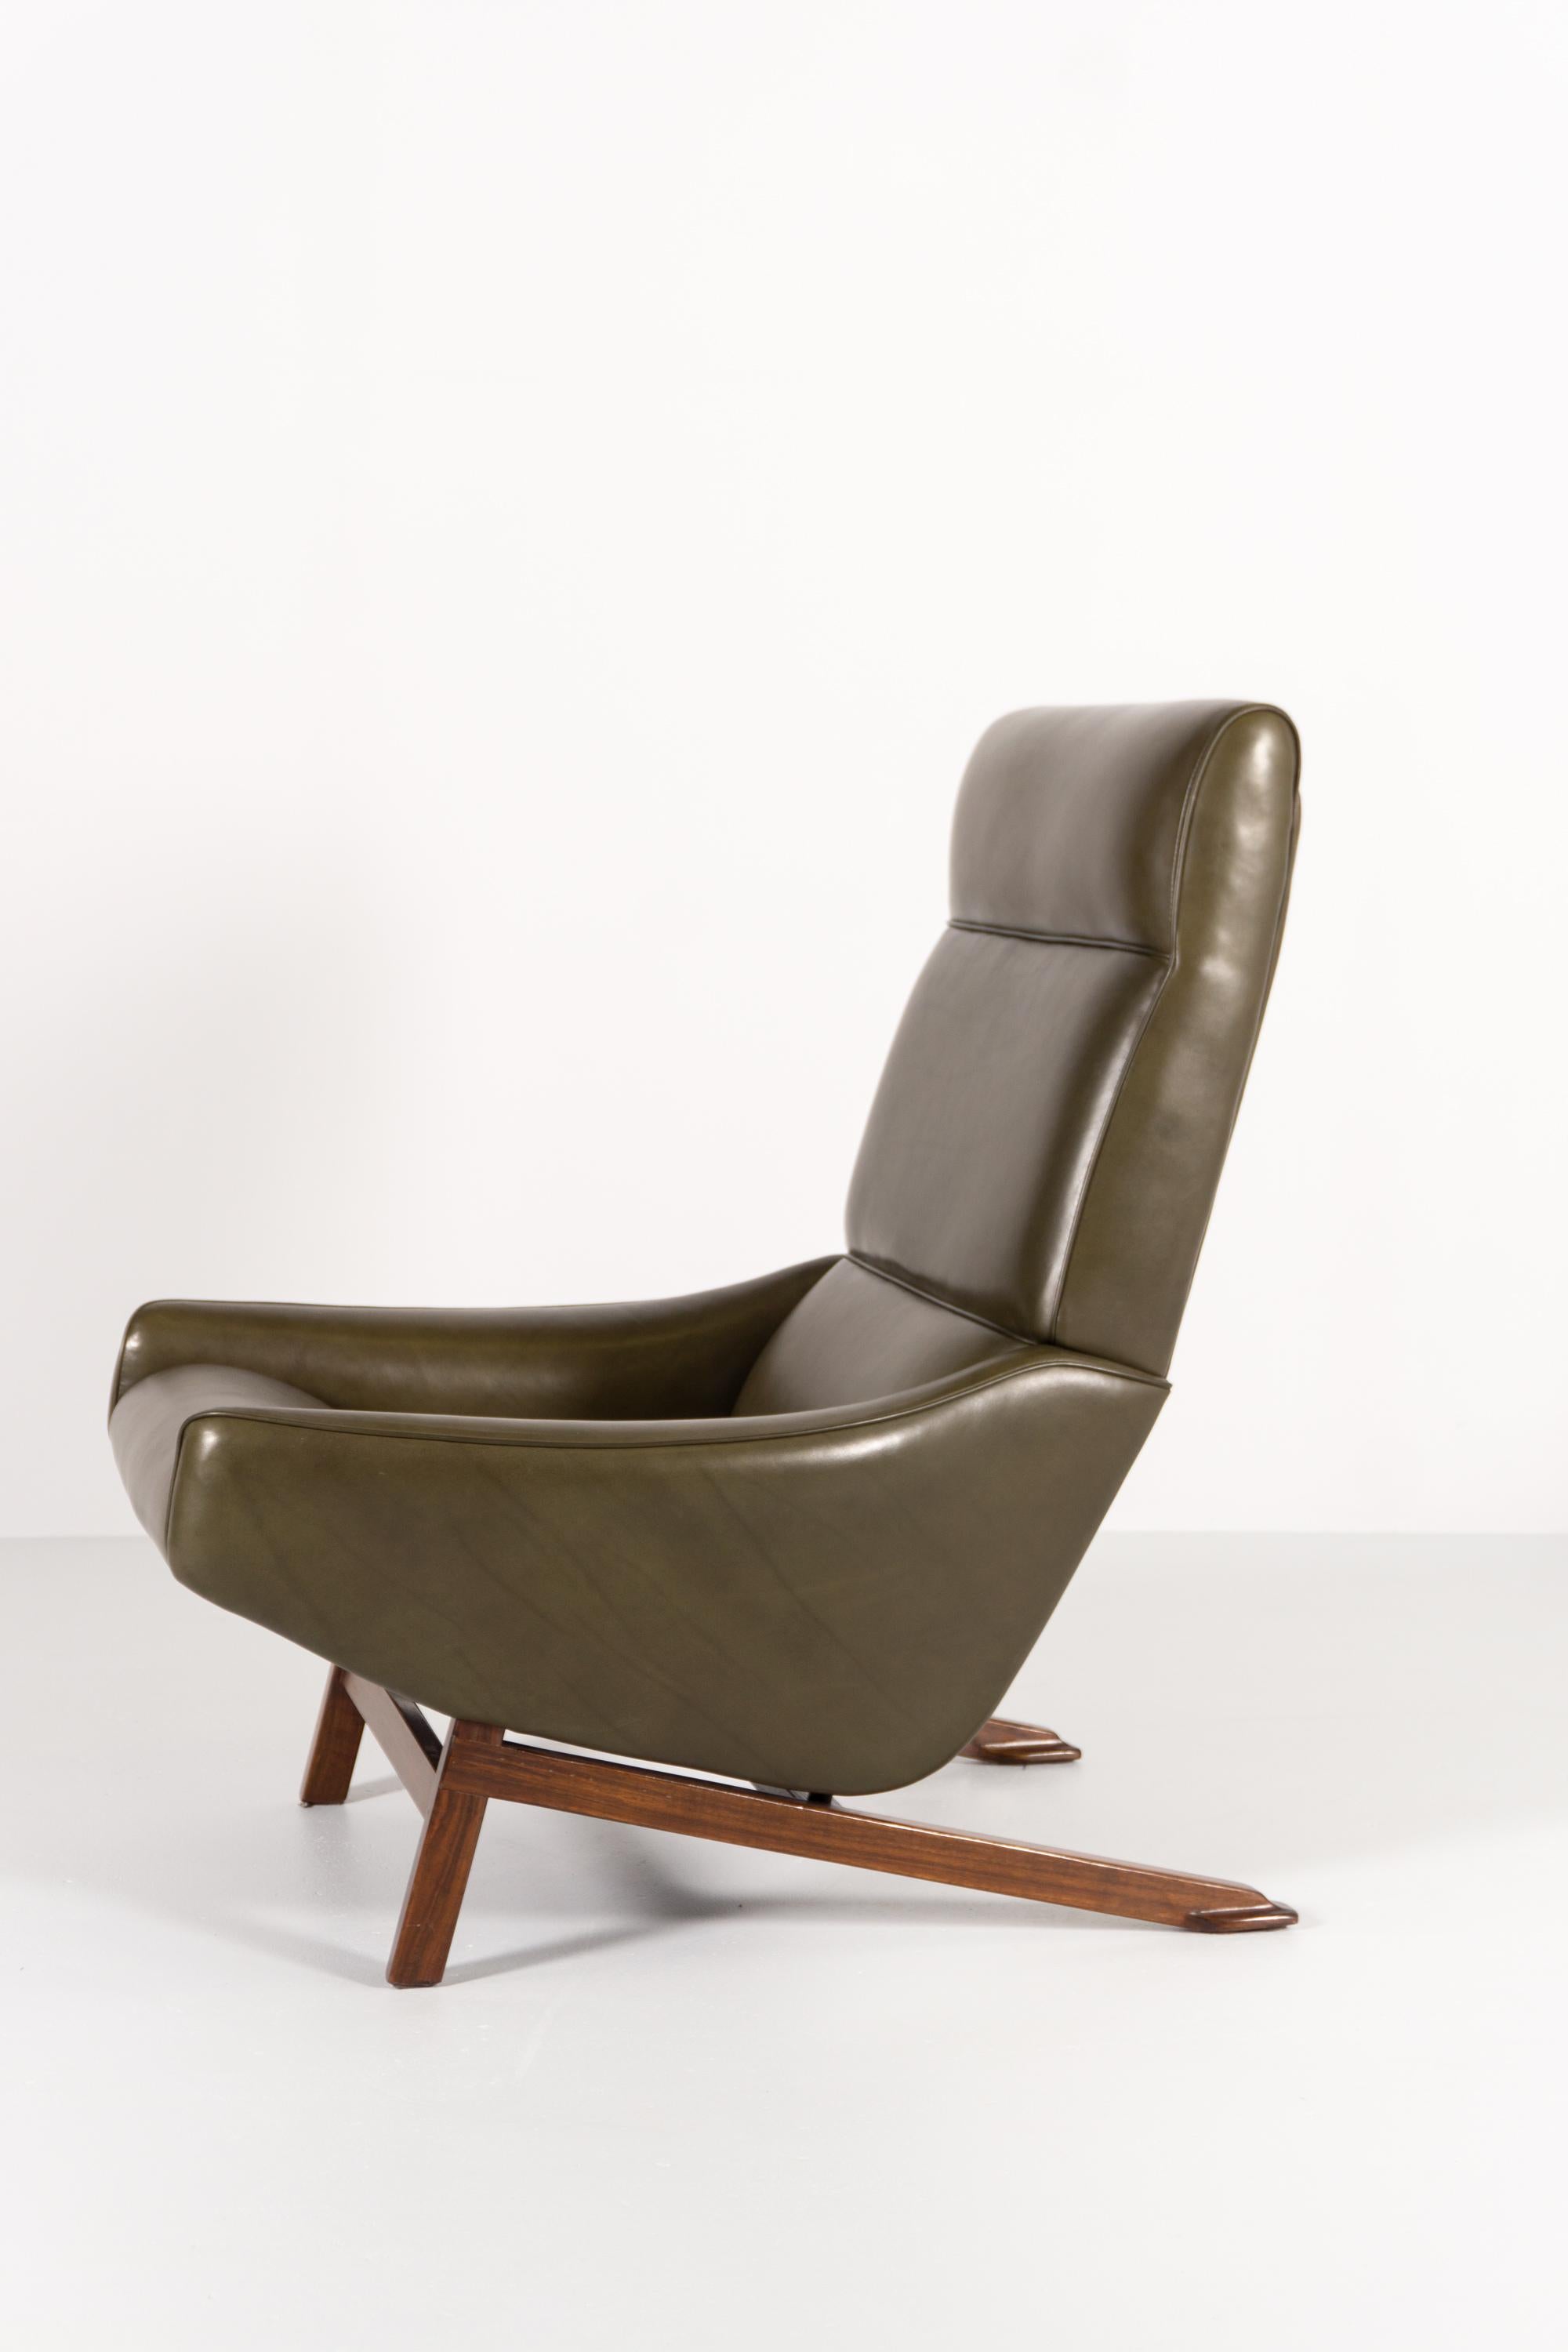 This sophisticated piece of furniture, designed by Gianfranco Frattini in 1960 for Cassina, stands out for its scultural and futuristic line. The cover, renewed like the foam, is made of the best leather.
Frattini was an Italian architect and